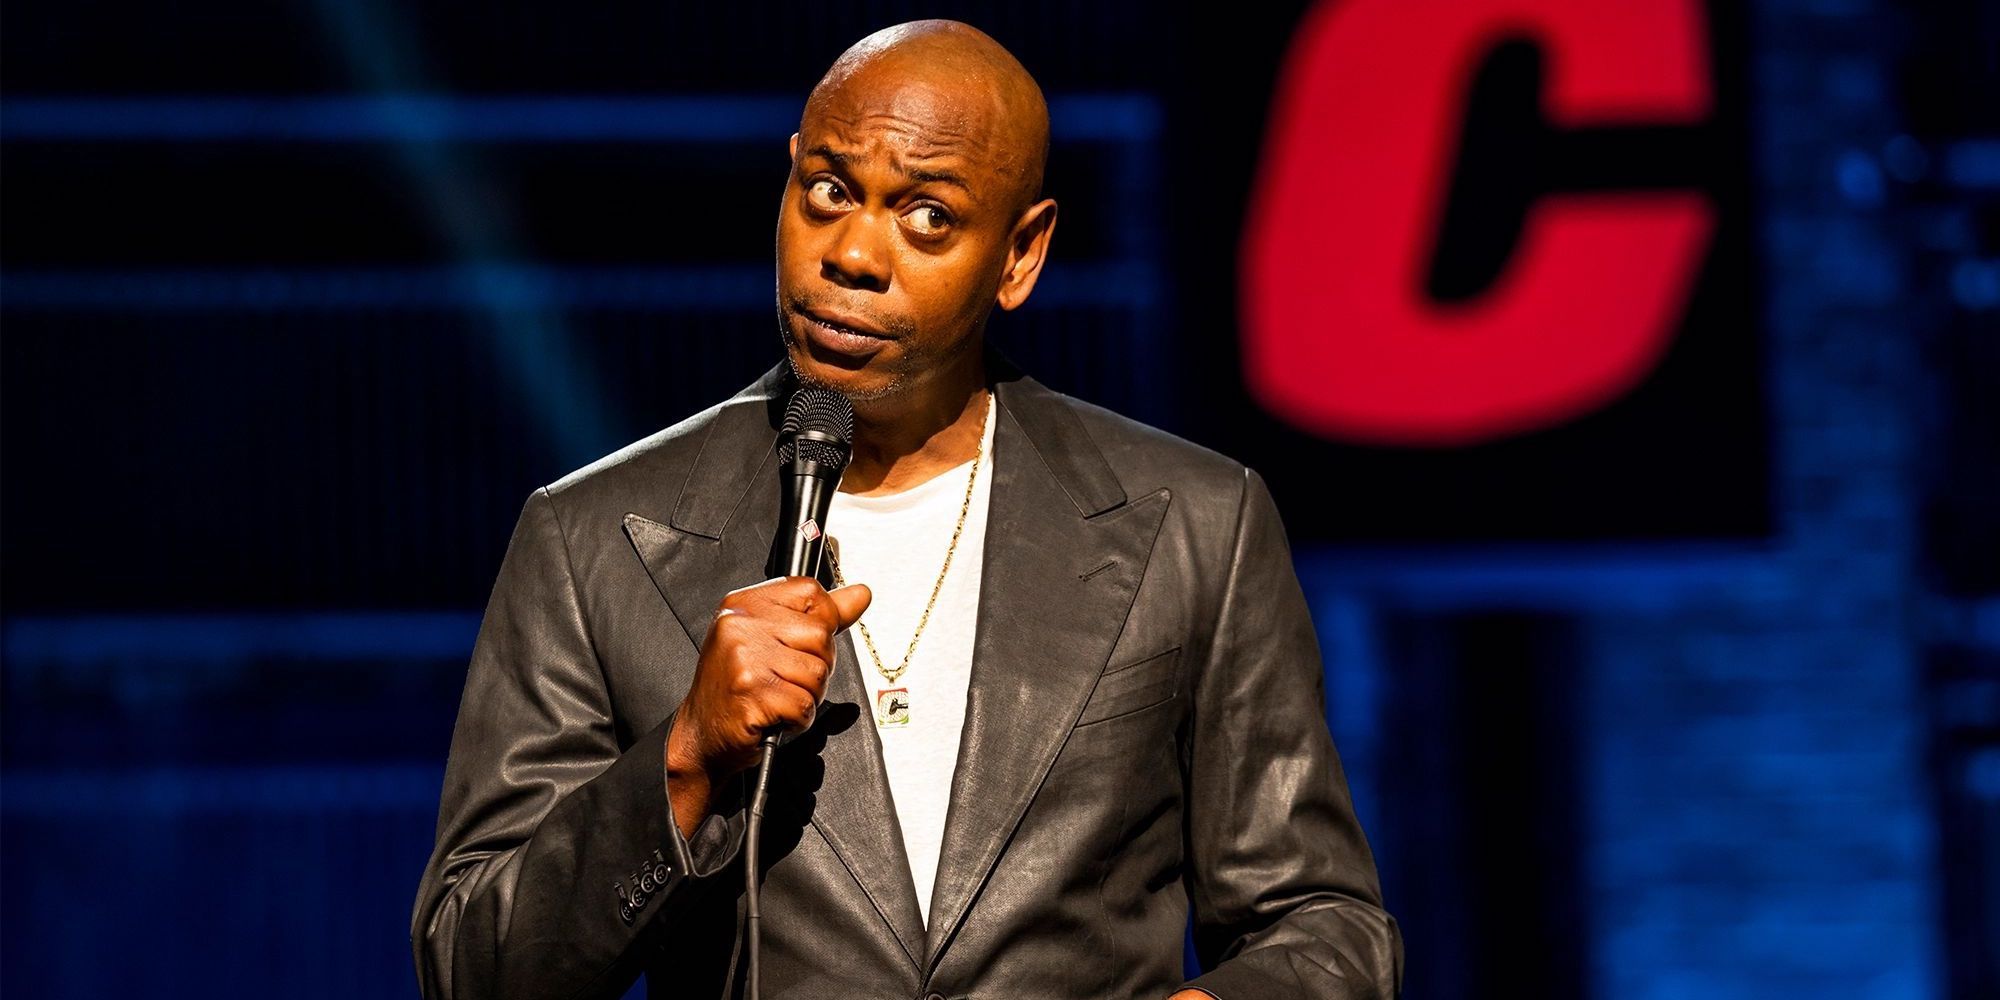 Dave Chappelle standing on stage and holding a microphone.